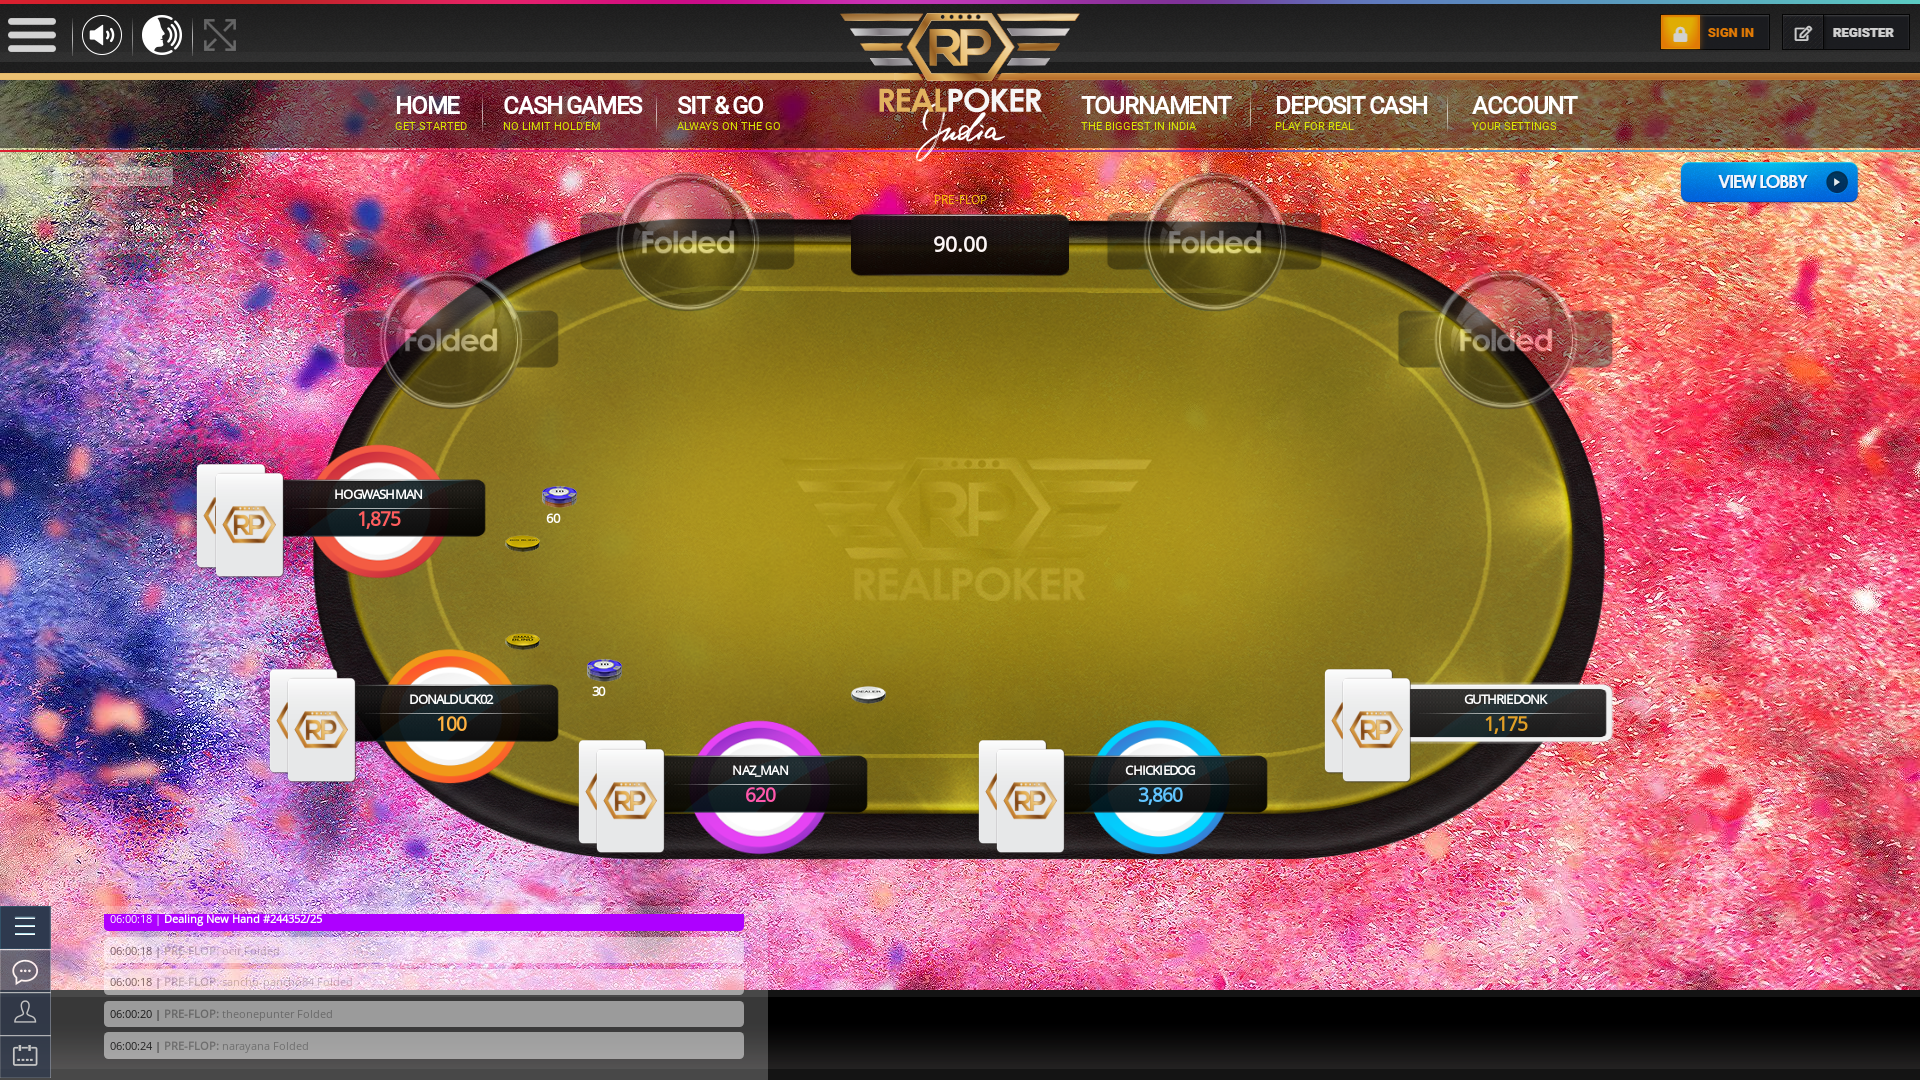 Real poker 10 player table in the 22nd minute